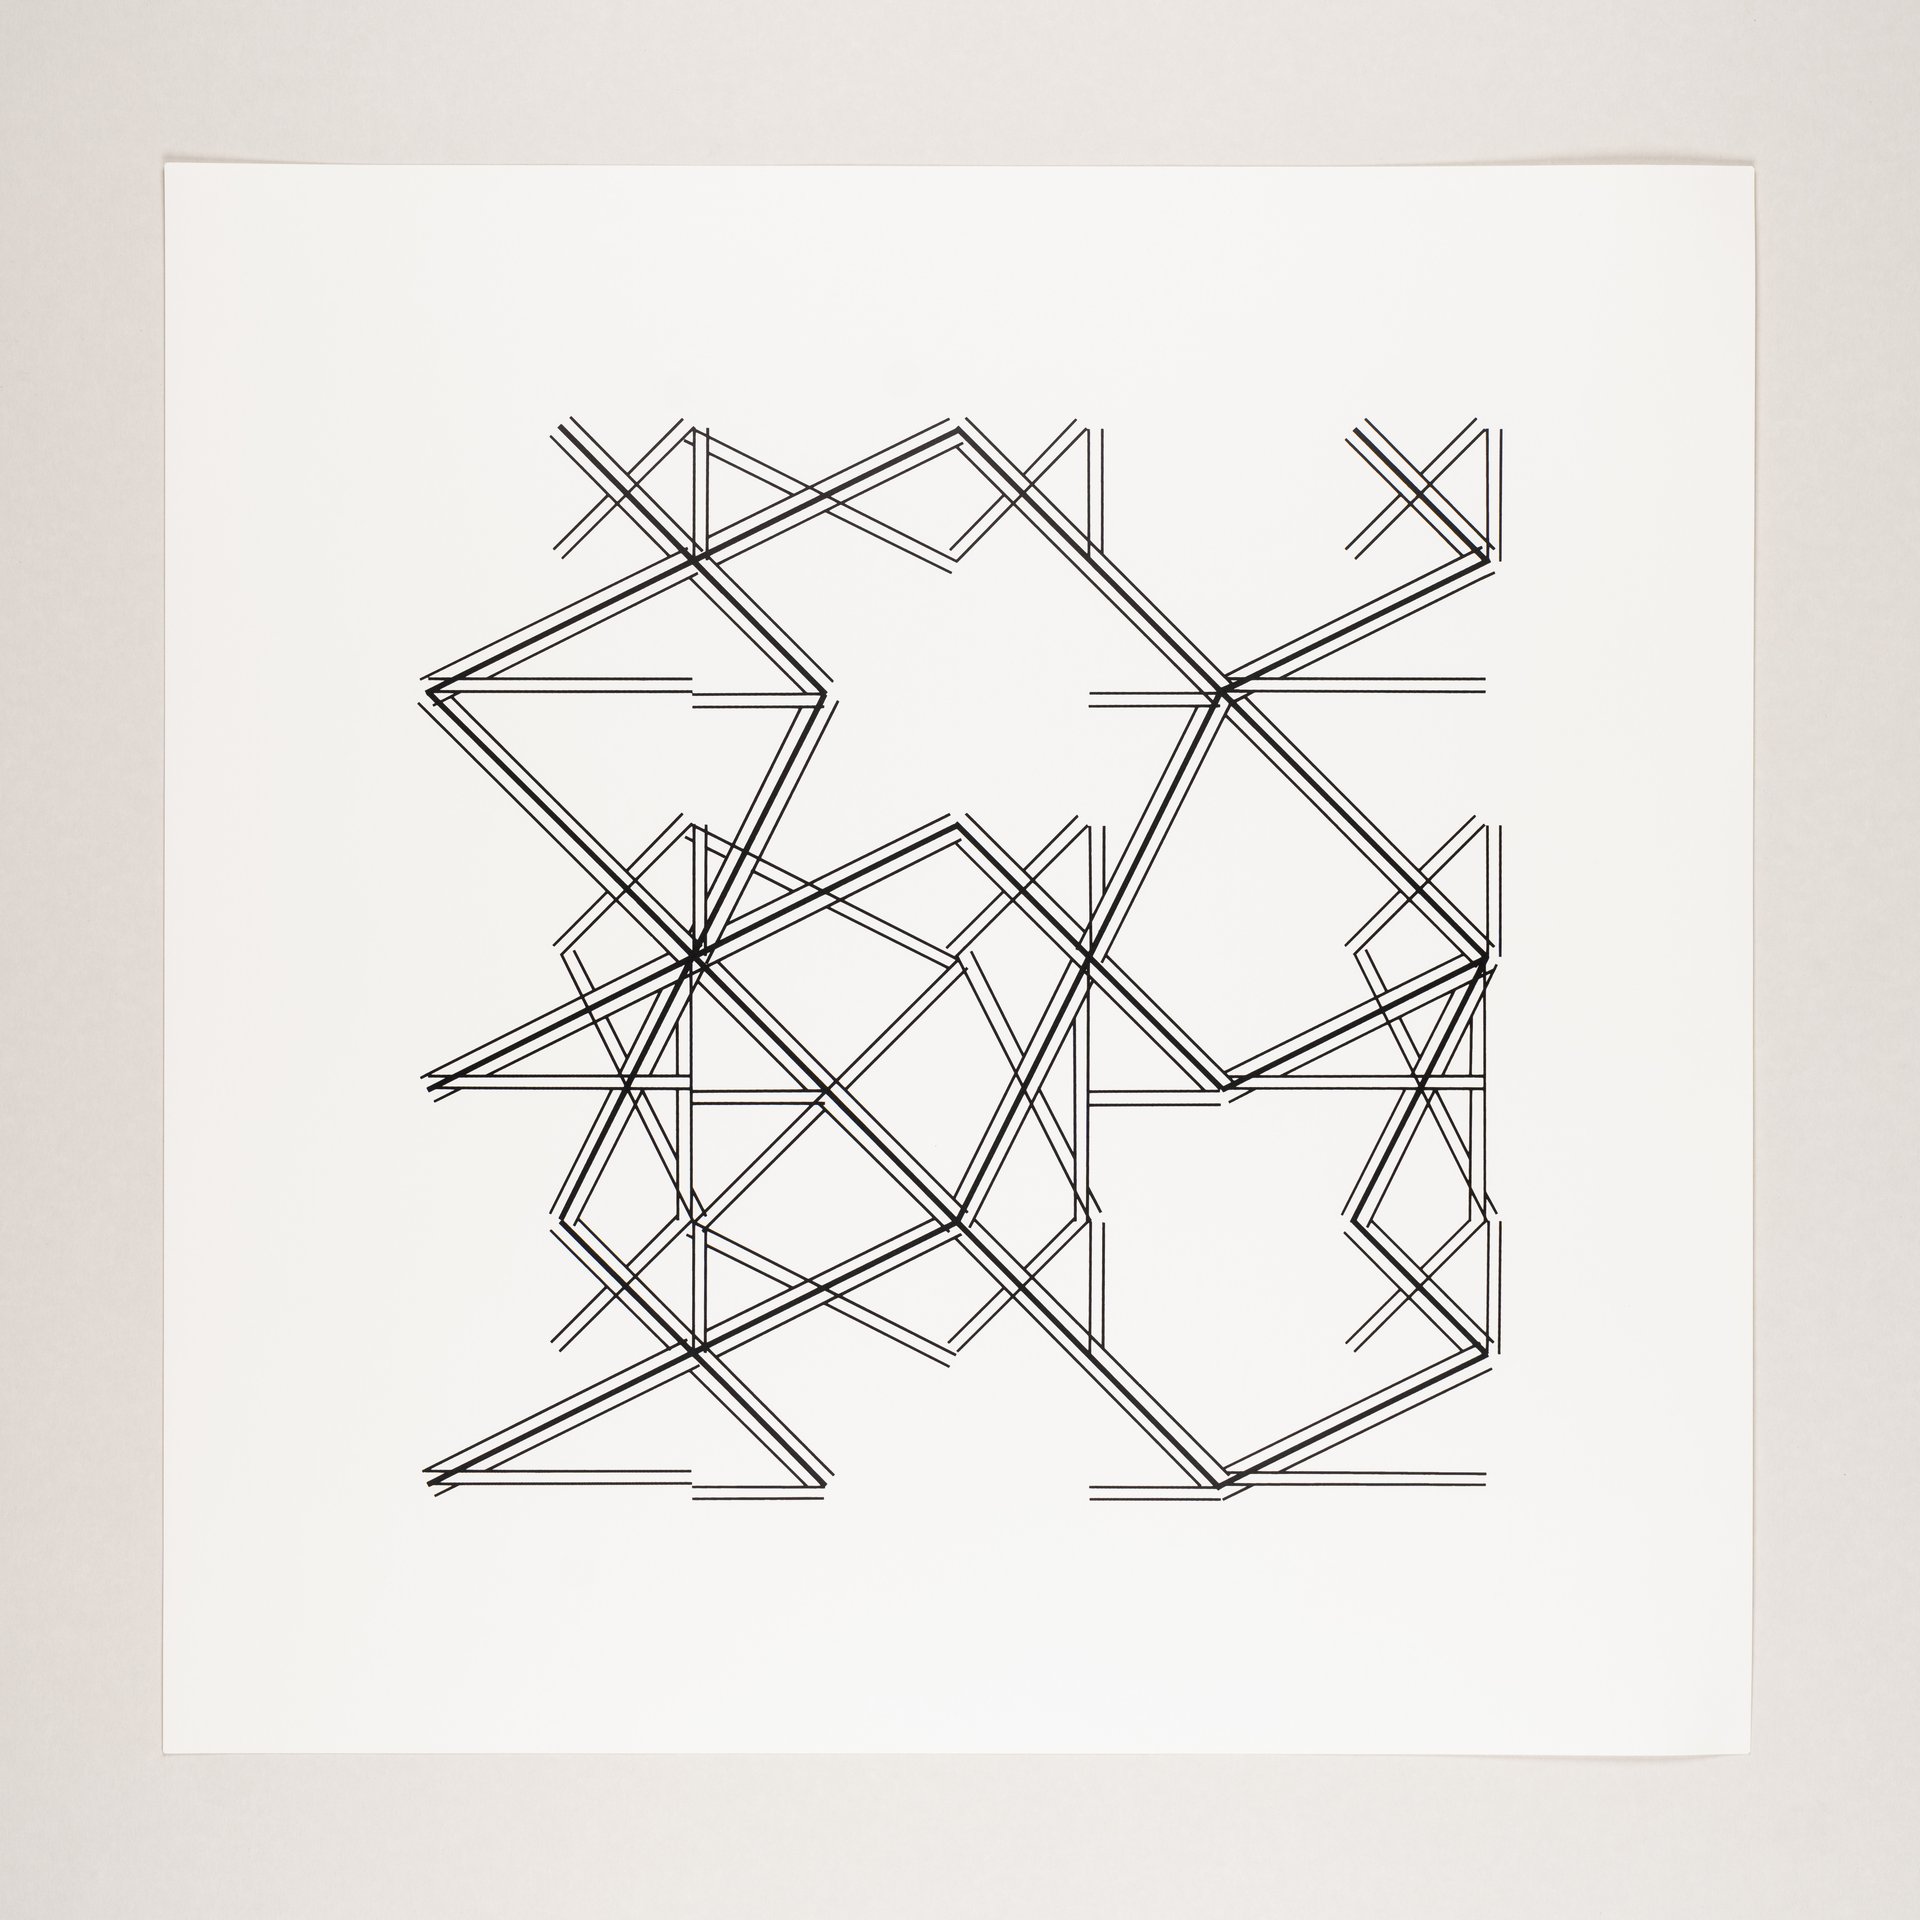 kenneth martin, &quot;untitled&quot; (1977), silk screen on paper, 60 x 60 cm